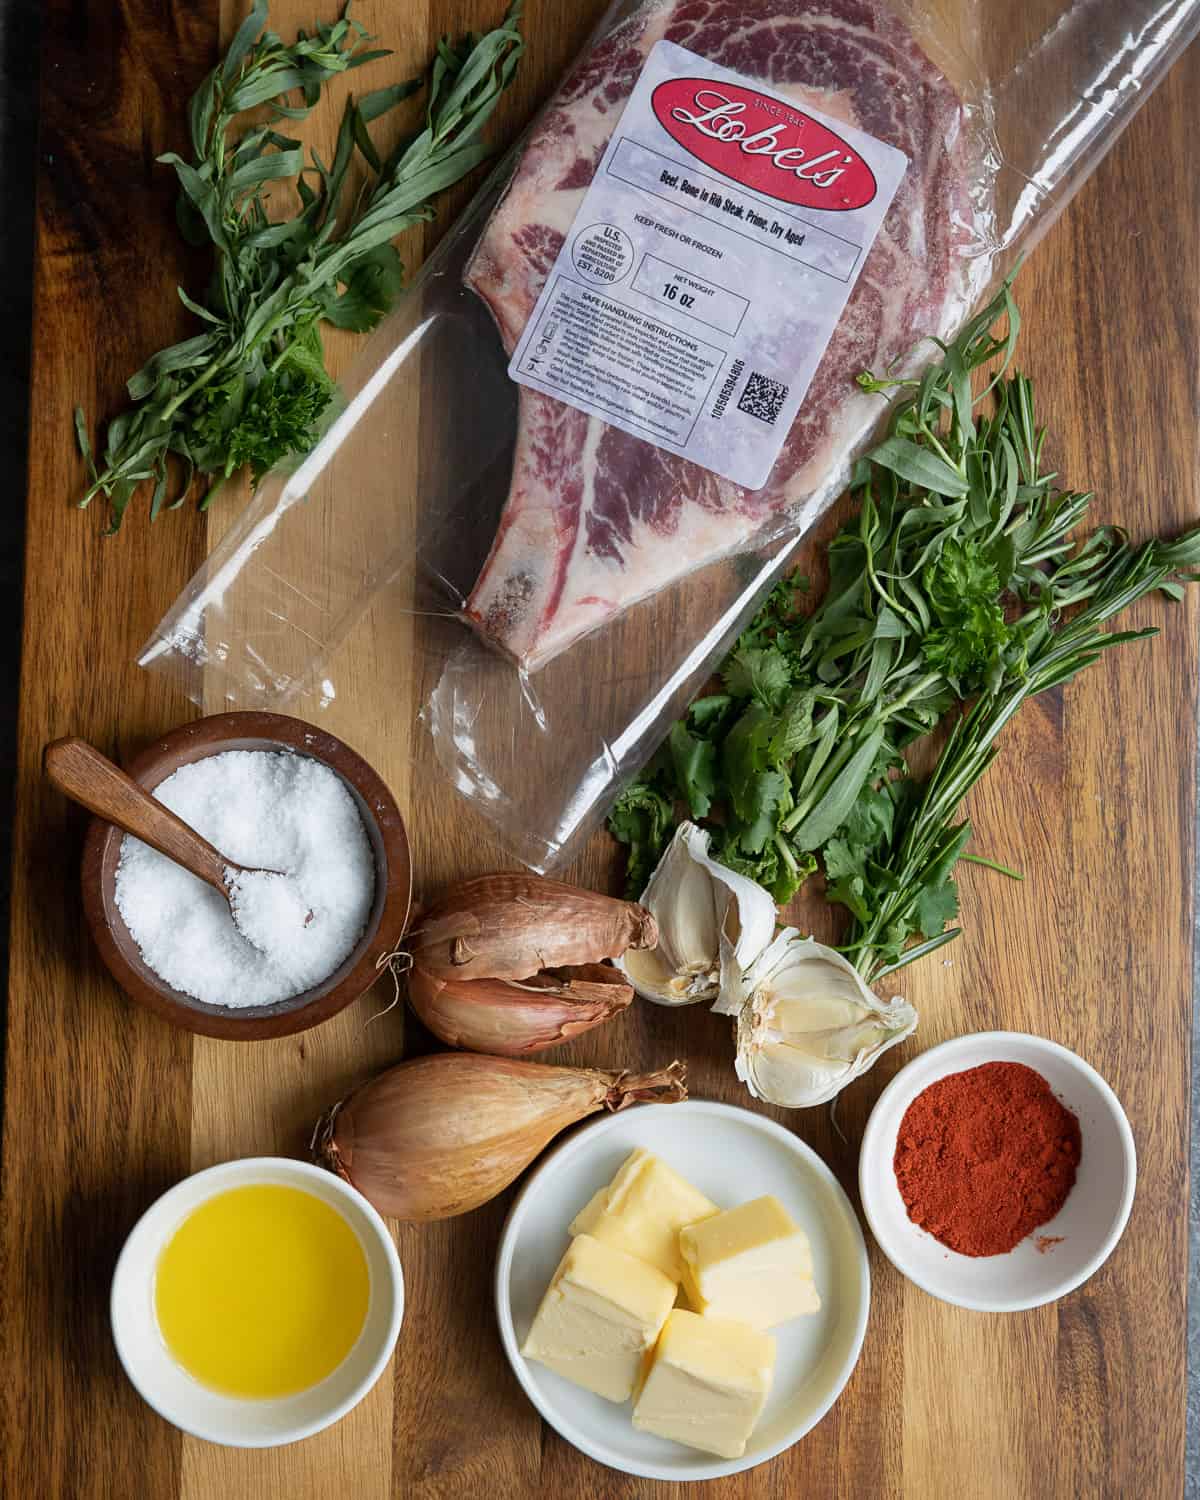 Ingredient shot with steak, herbs, butter, spices and garlic